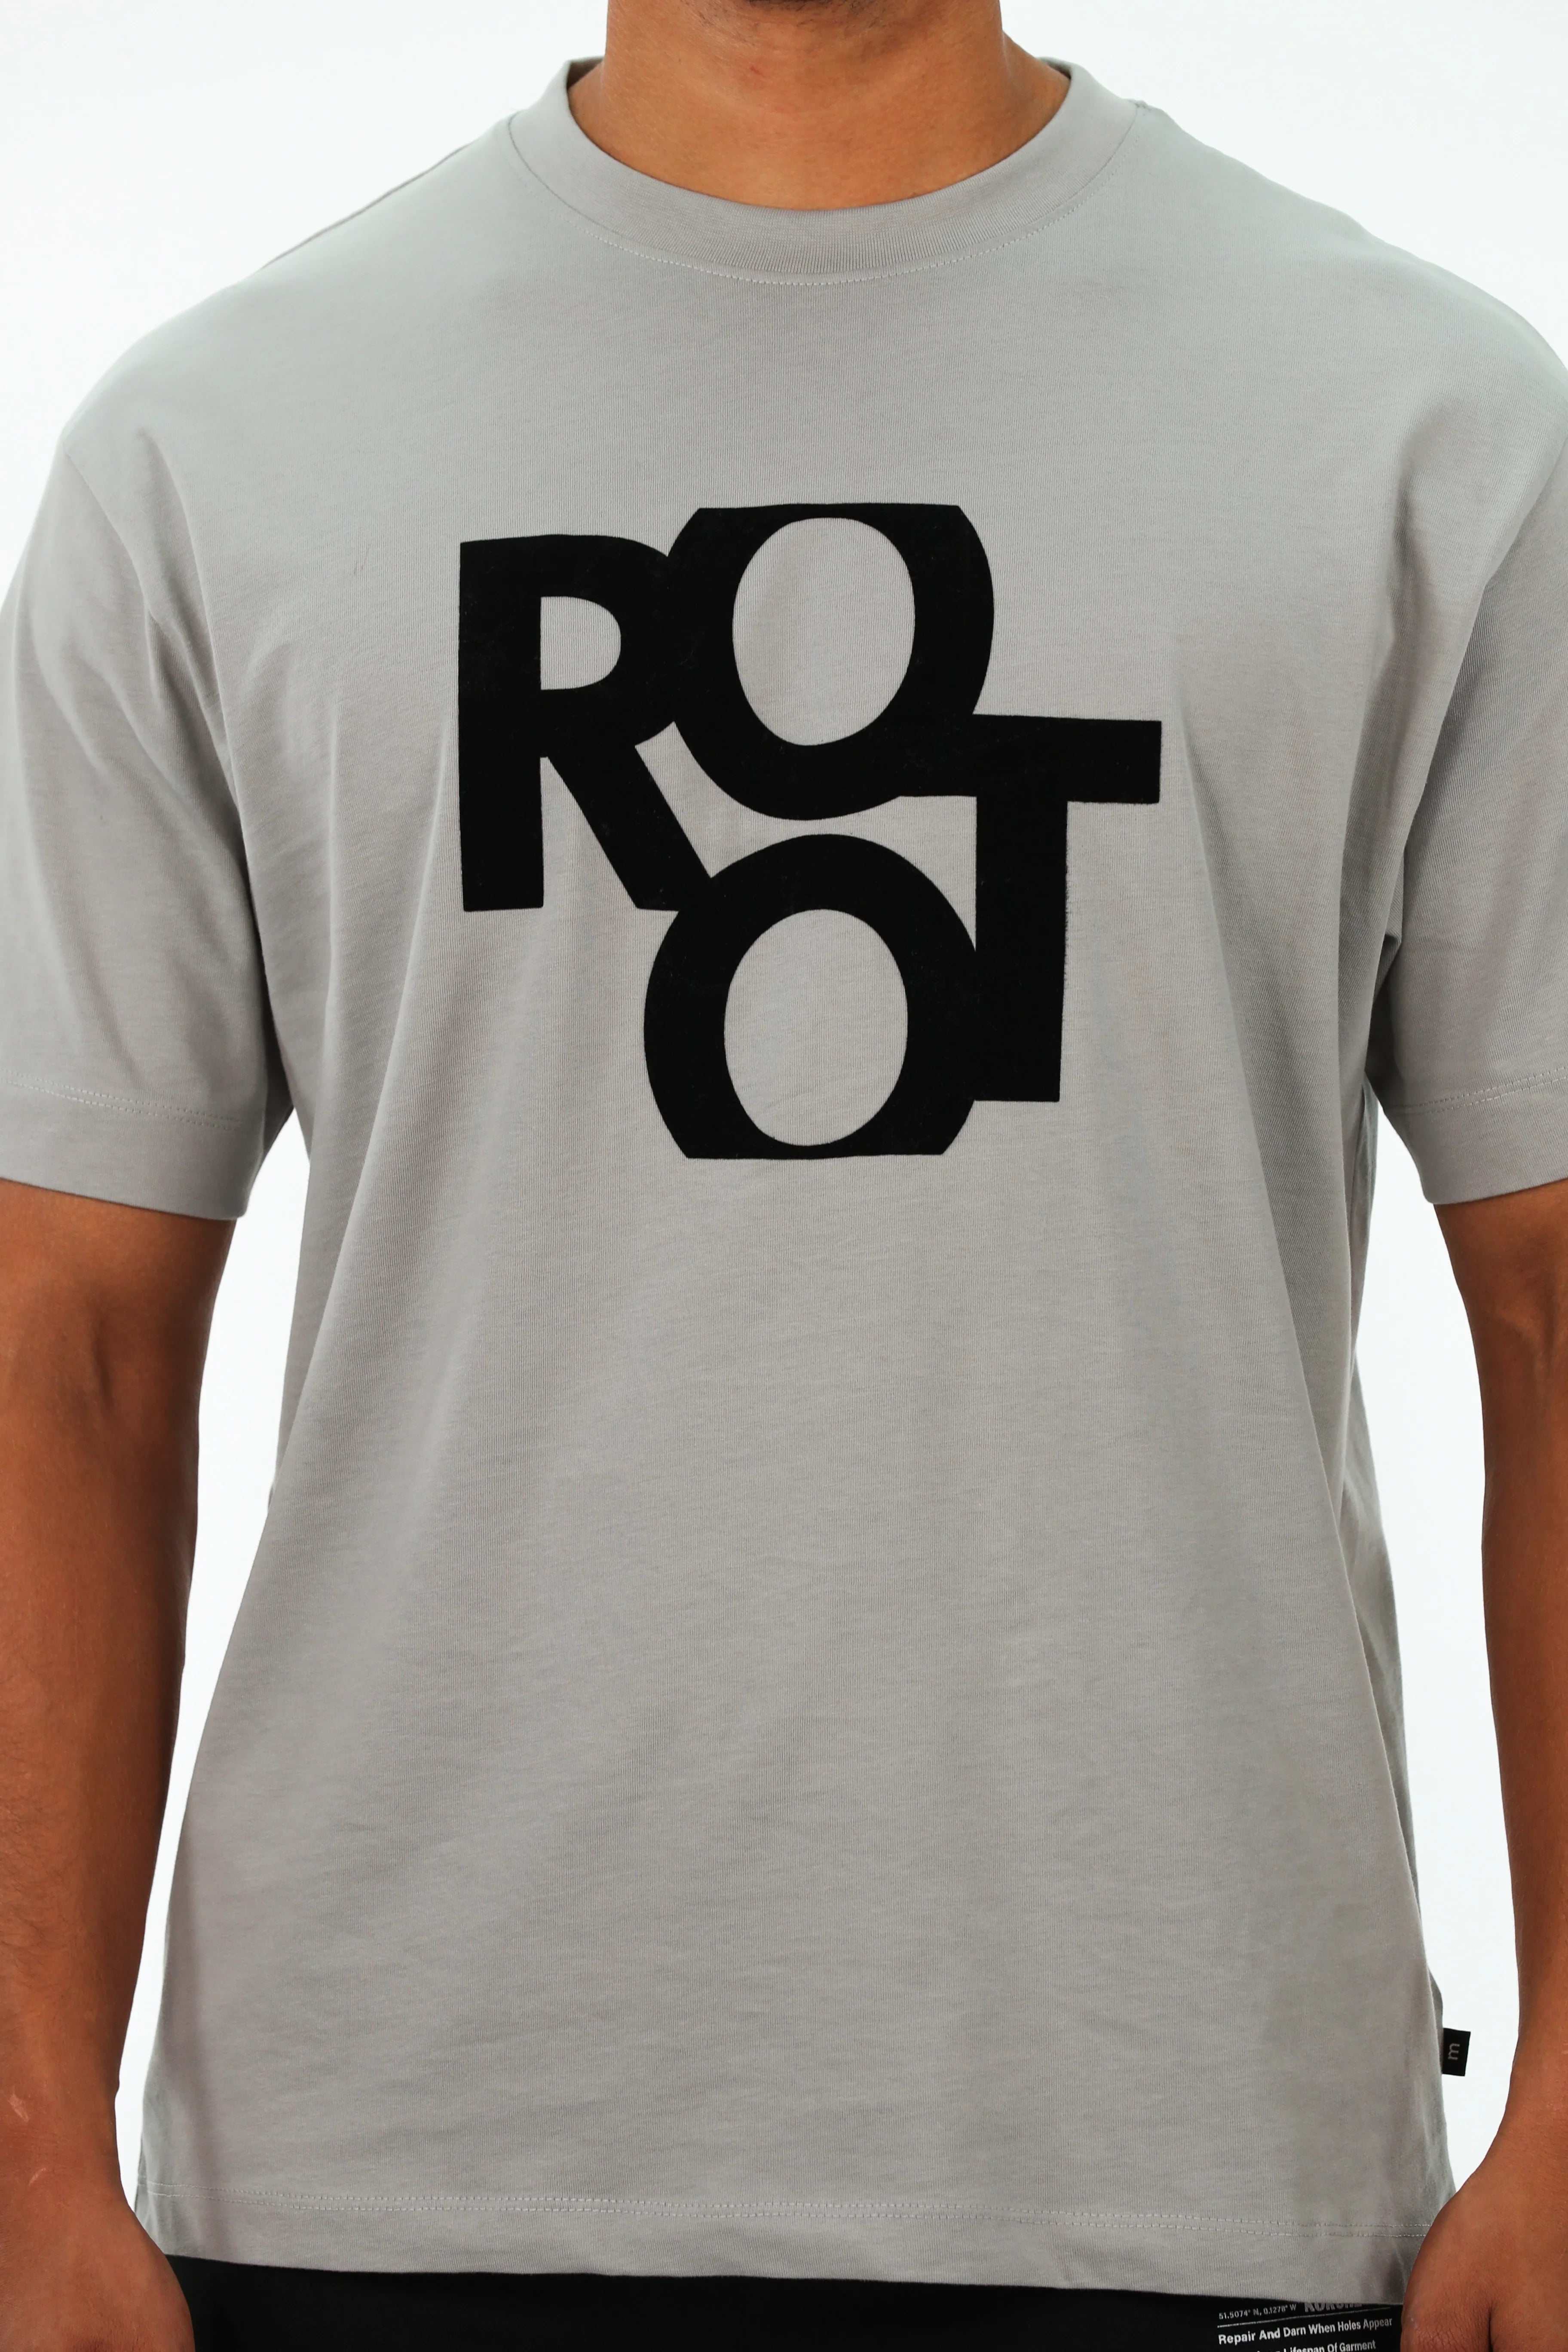 Oversized Mid Grey T-shirt With "Root" Front Design